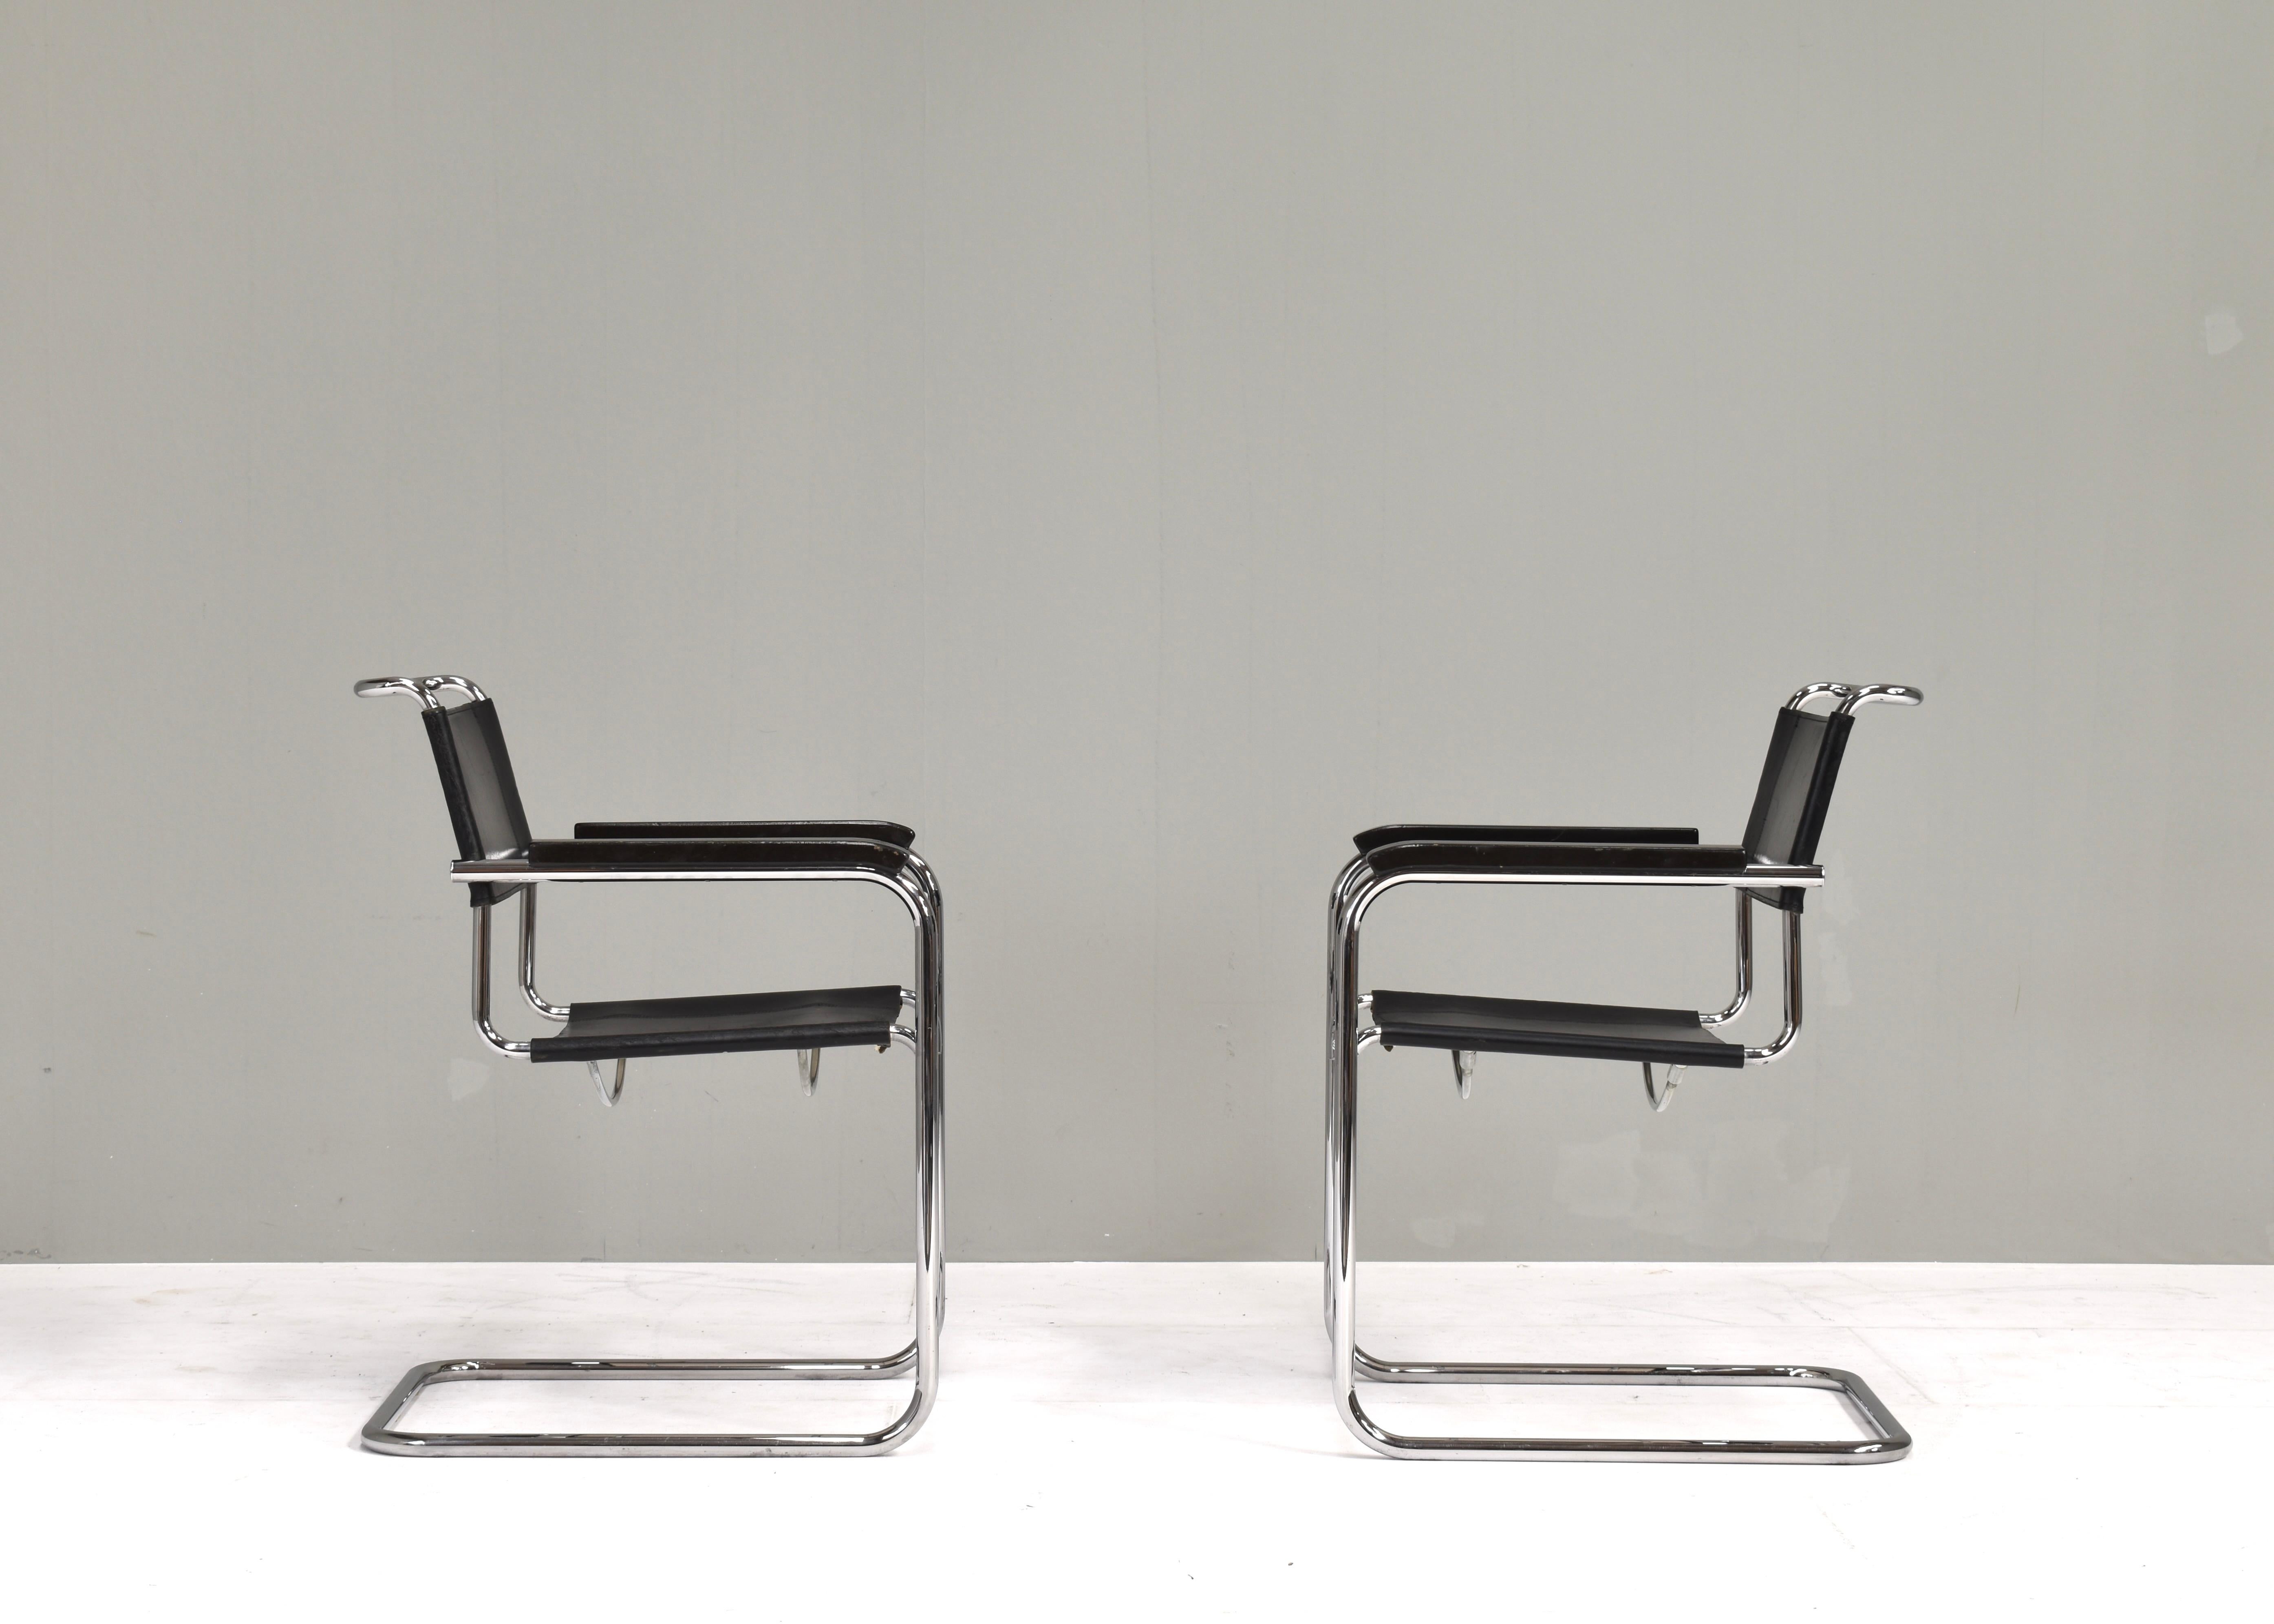 Designer: Mart Stam
Manufacturer: Thonet (stamped in leather underneath seat)
Country: Germany
Model: Thonet S34 Cantilever (Freischwinger) armchair
Color: Black / Silver
Material: Black leather / Wood / Chrome
Size in cm. WxDxH: 57x64x84 Seat